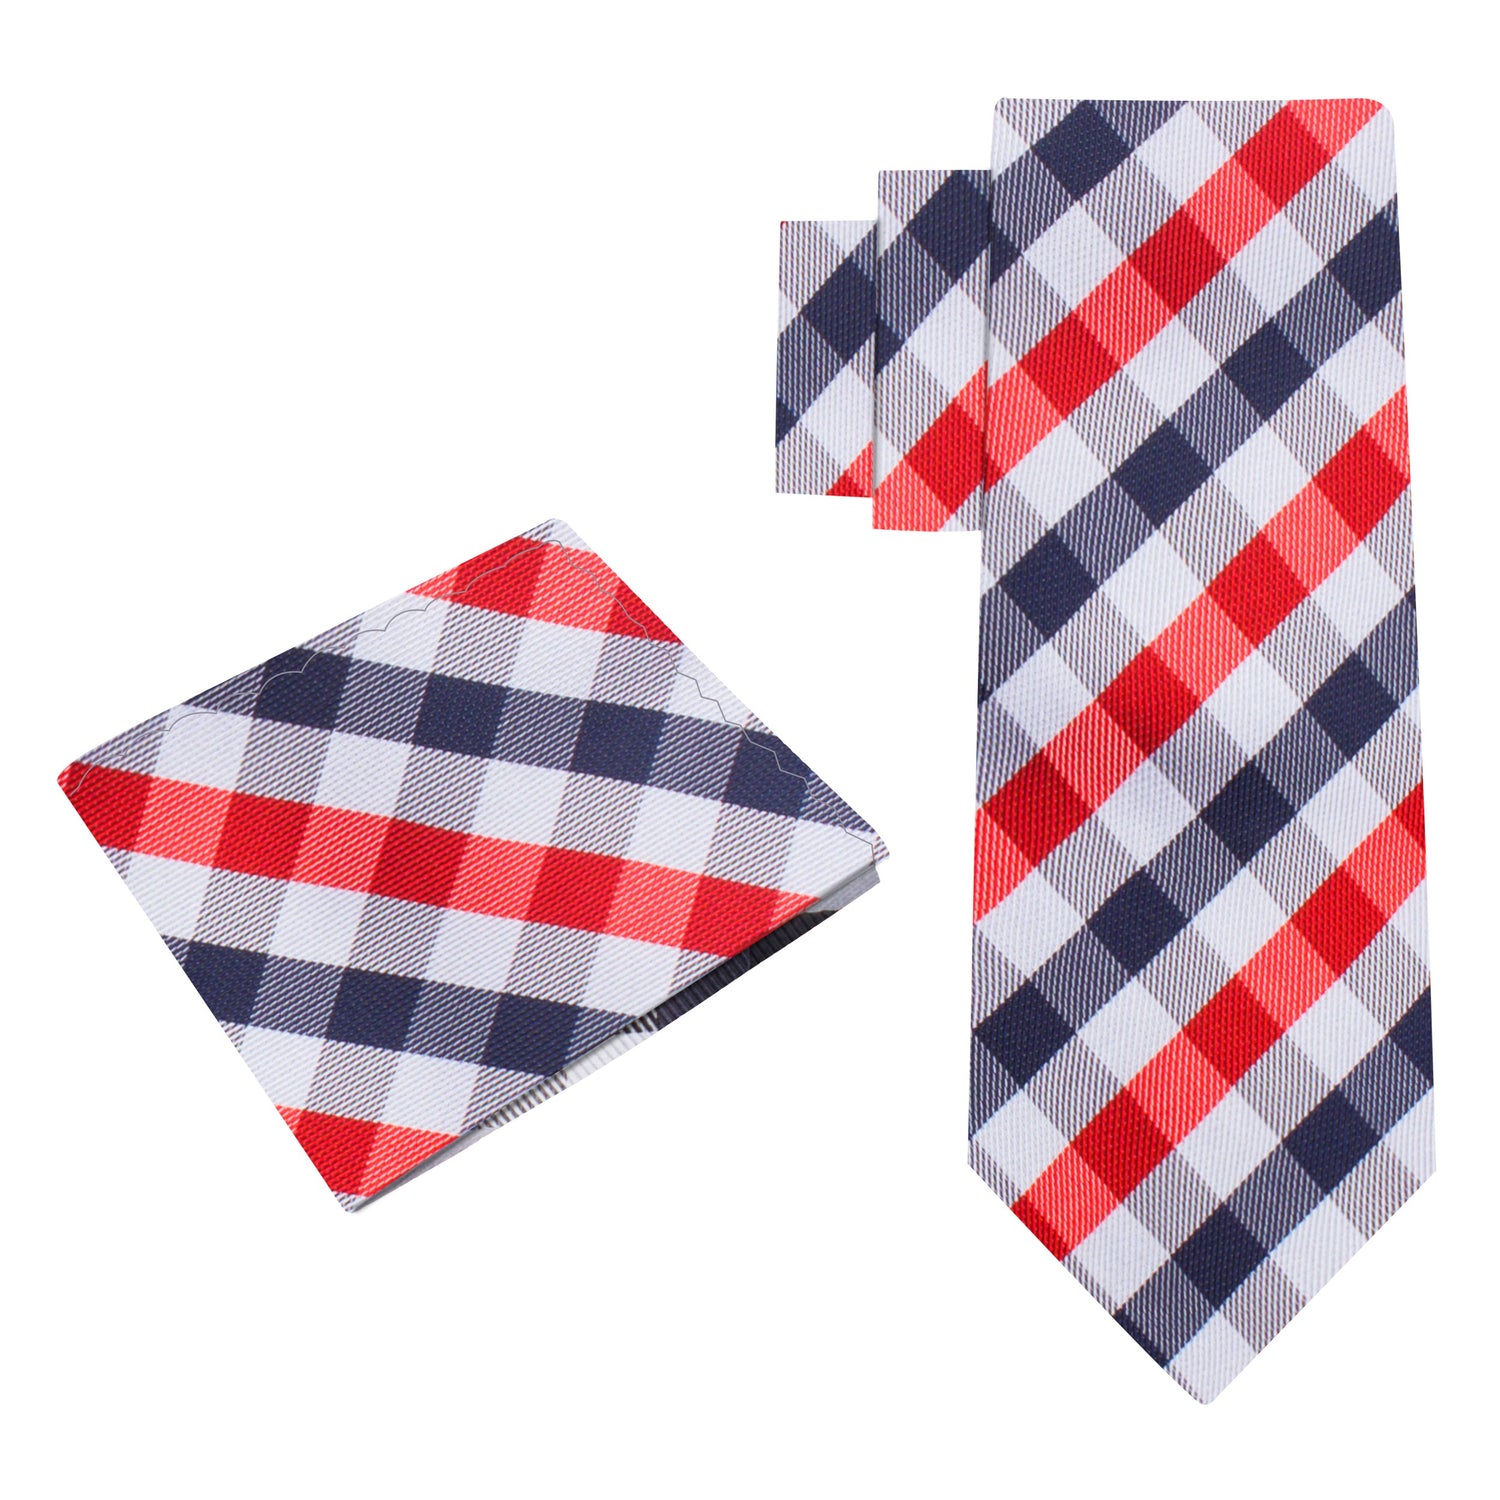 Alt View: A Red, White, Blue Small Geometric Checker Pattern Silk Necktie, With Matching Pocket Square